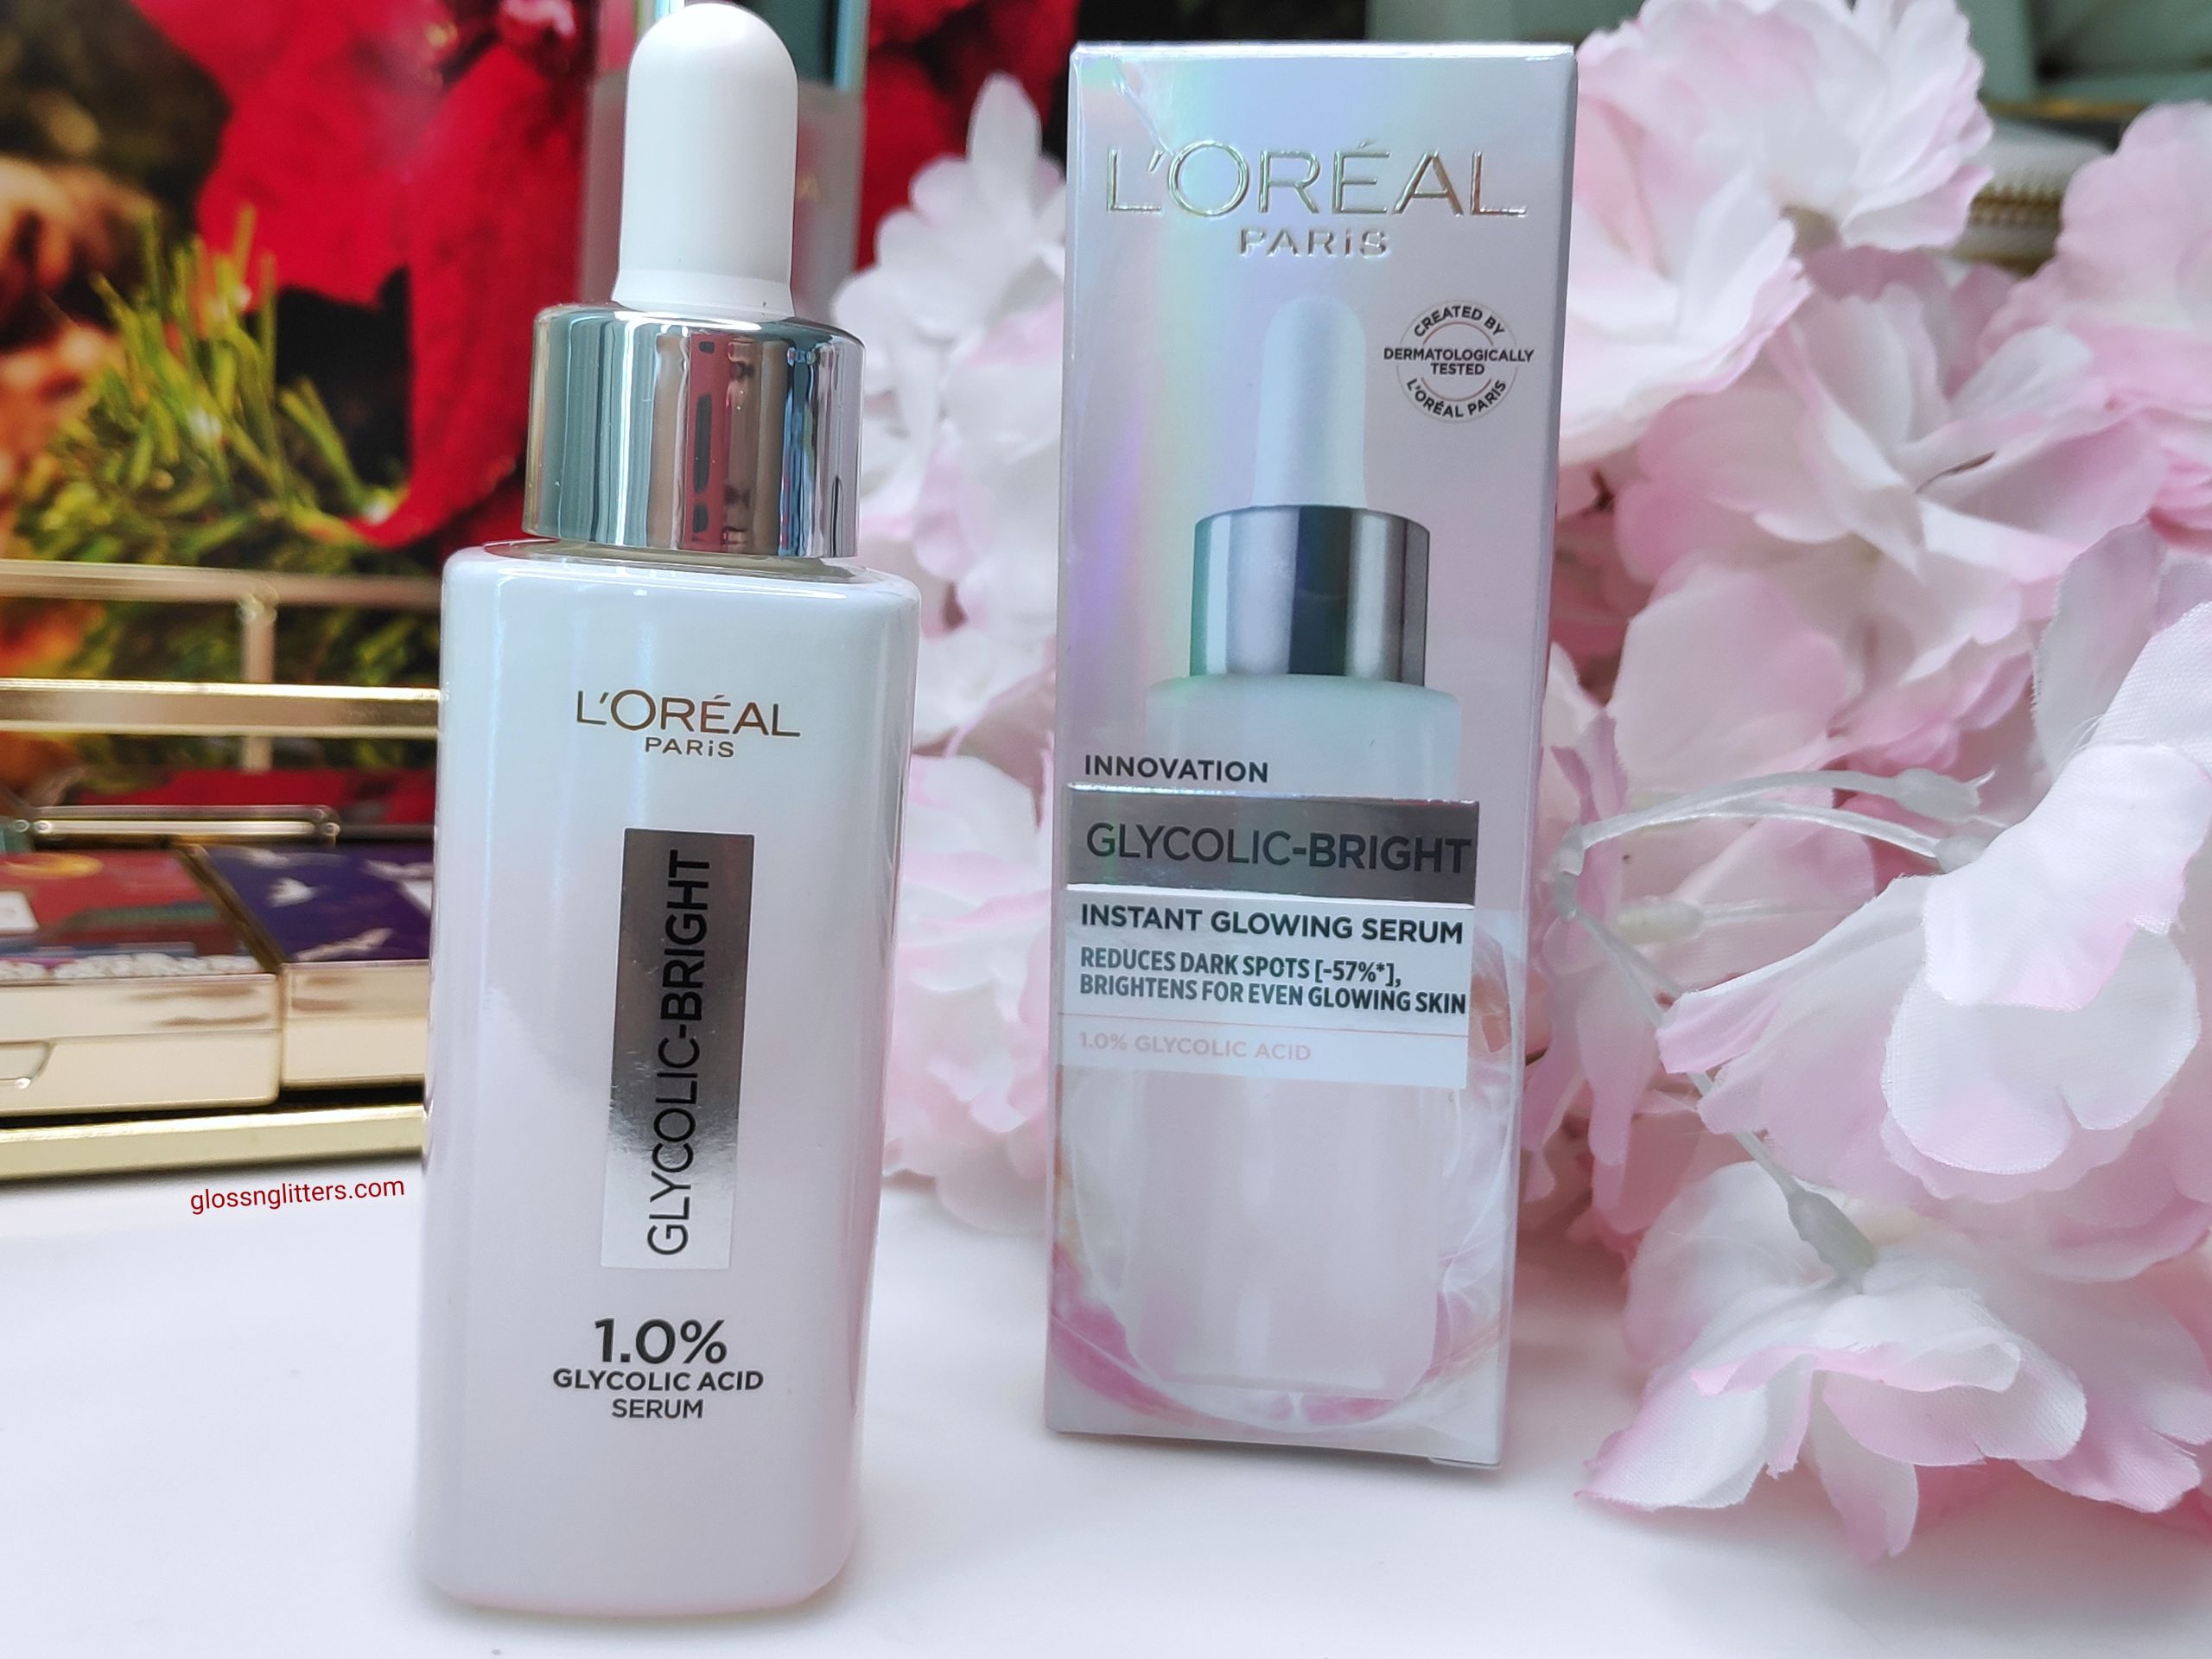 New L'Oreal Glycolic Bright Instant Glowing Face Serum Review ...